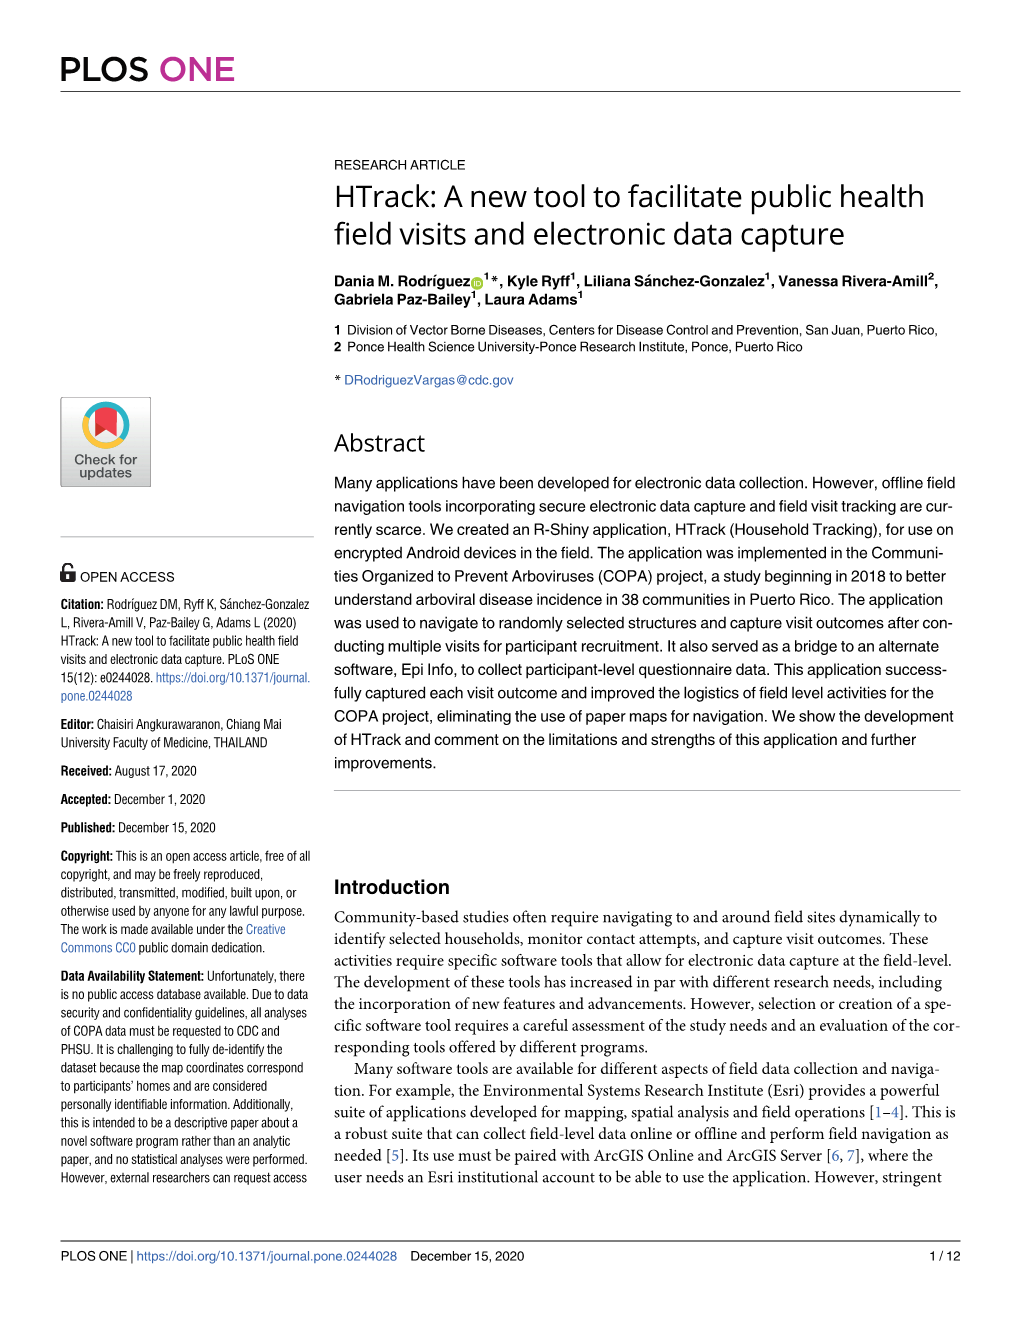 A New Tool to Facilitate Public Health Field Visits and Electronic Data Capture